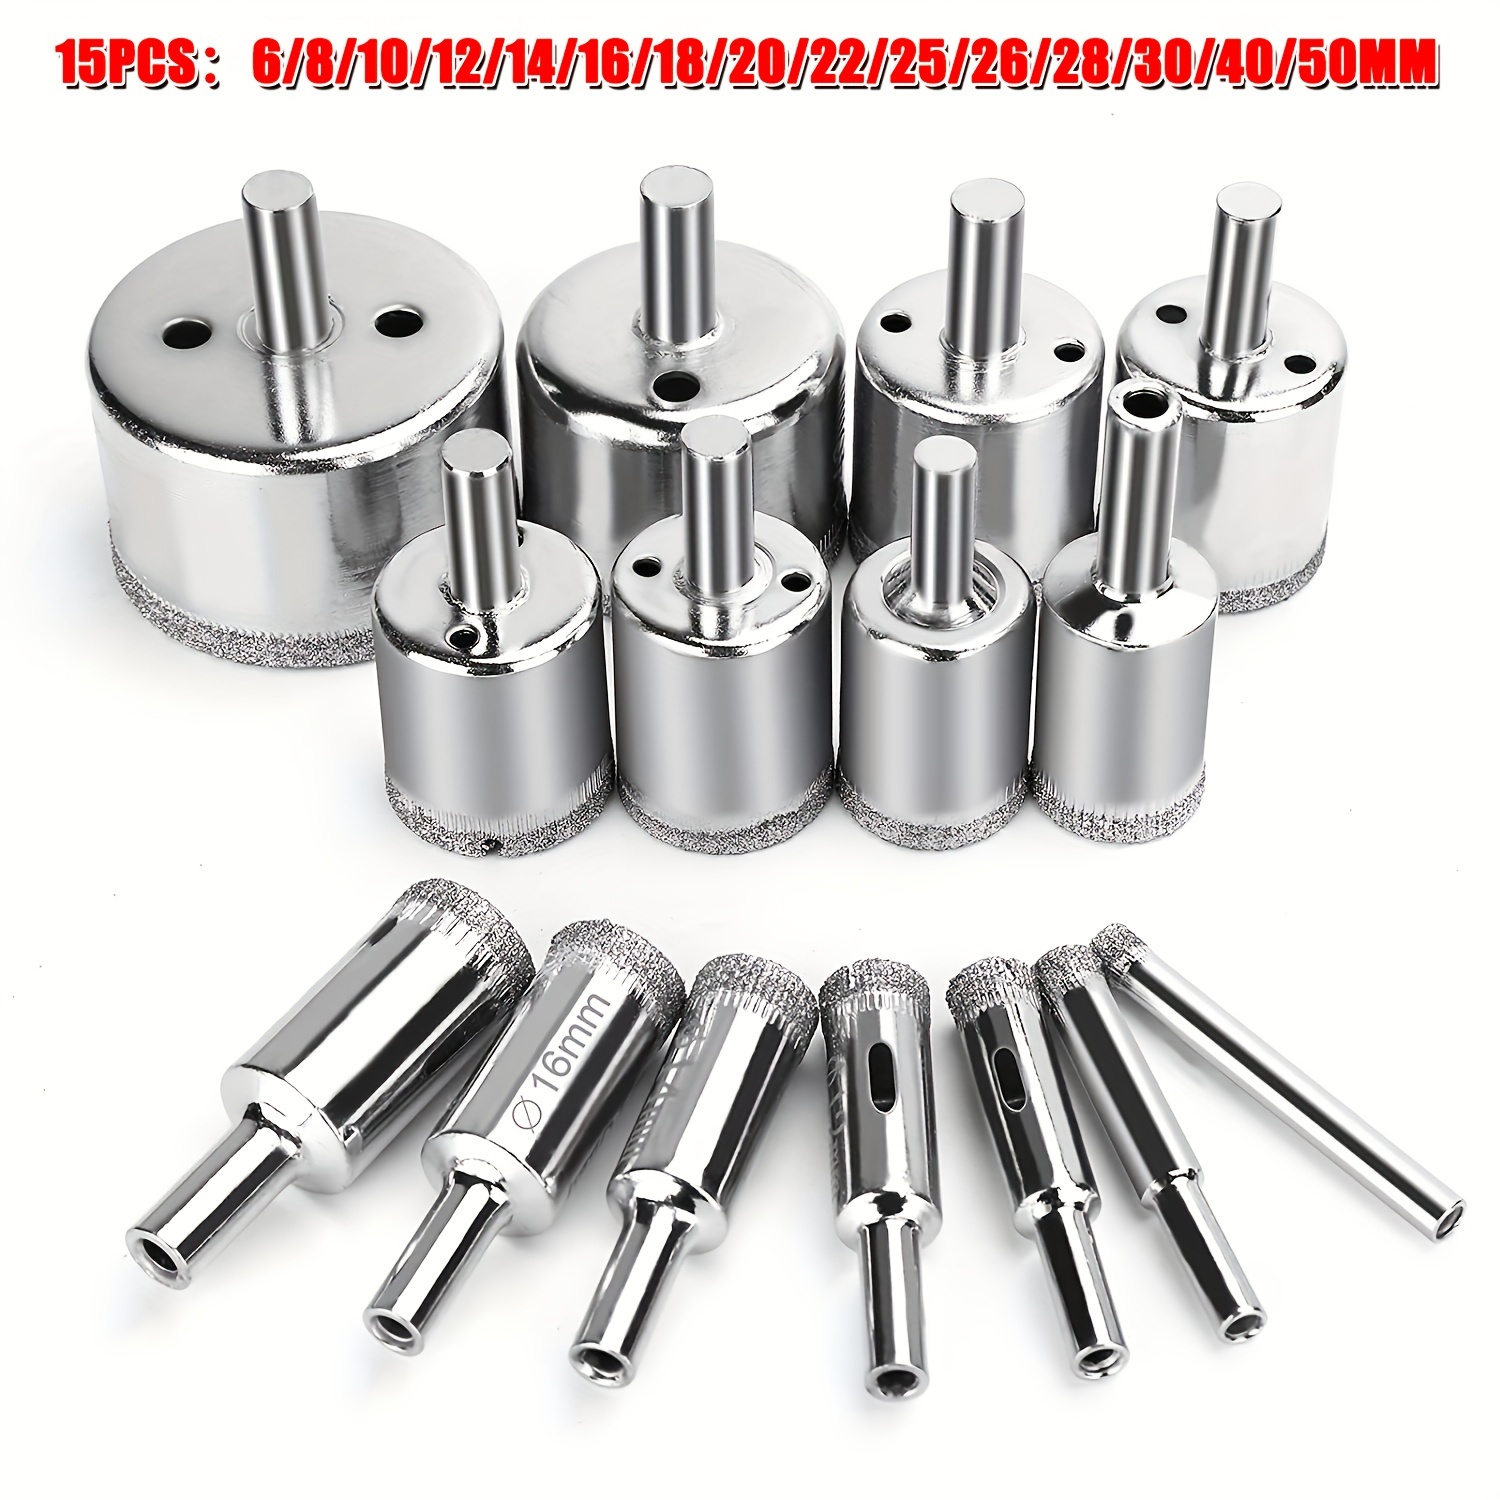 

15pcs Diamond Hole Saw Drill Bit Set, Metal, For Ceramic, Glass, Porcelain Tile, 0.32" To 2" Core Bits, Power Tool Accessories, Smooth Drilling, With Solid Handle And Sharp Cutting Edge